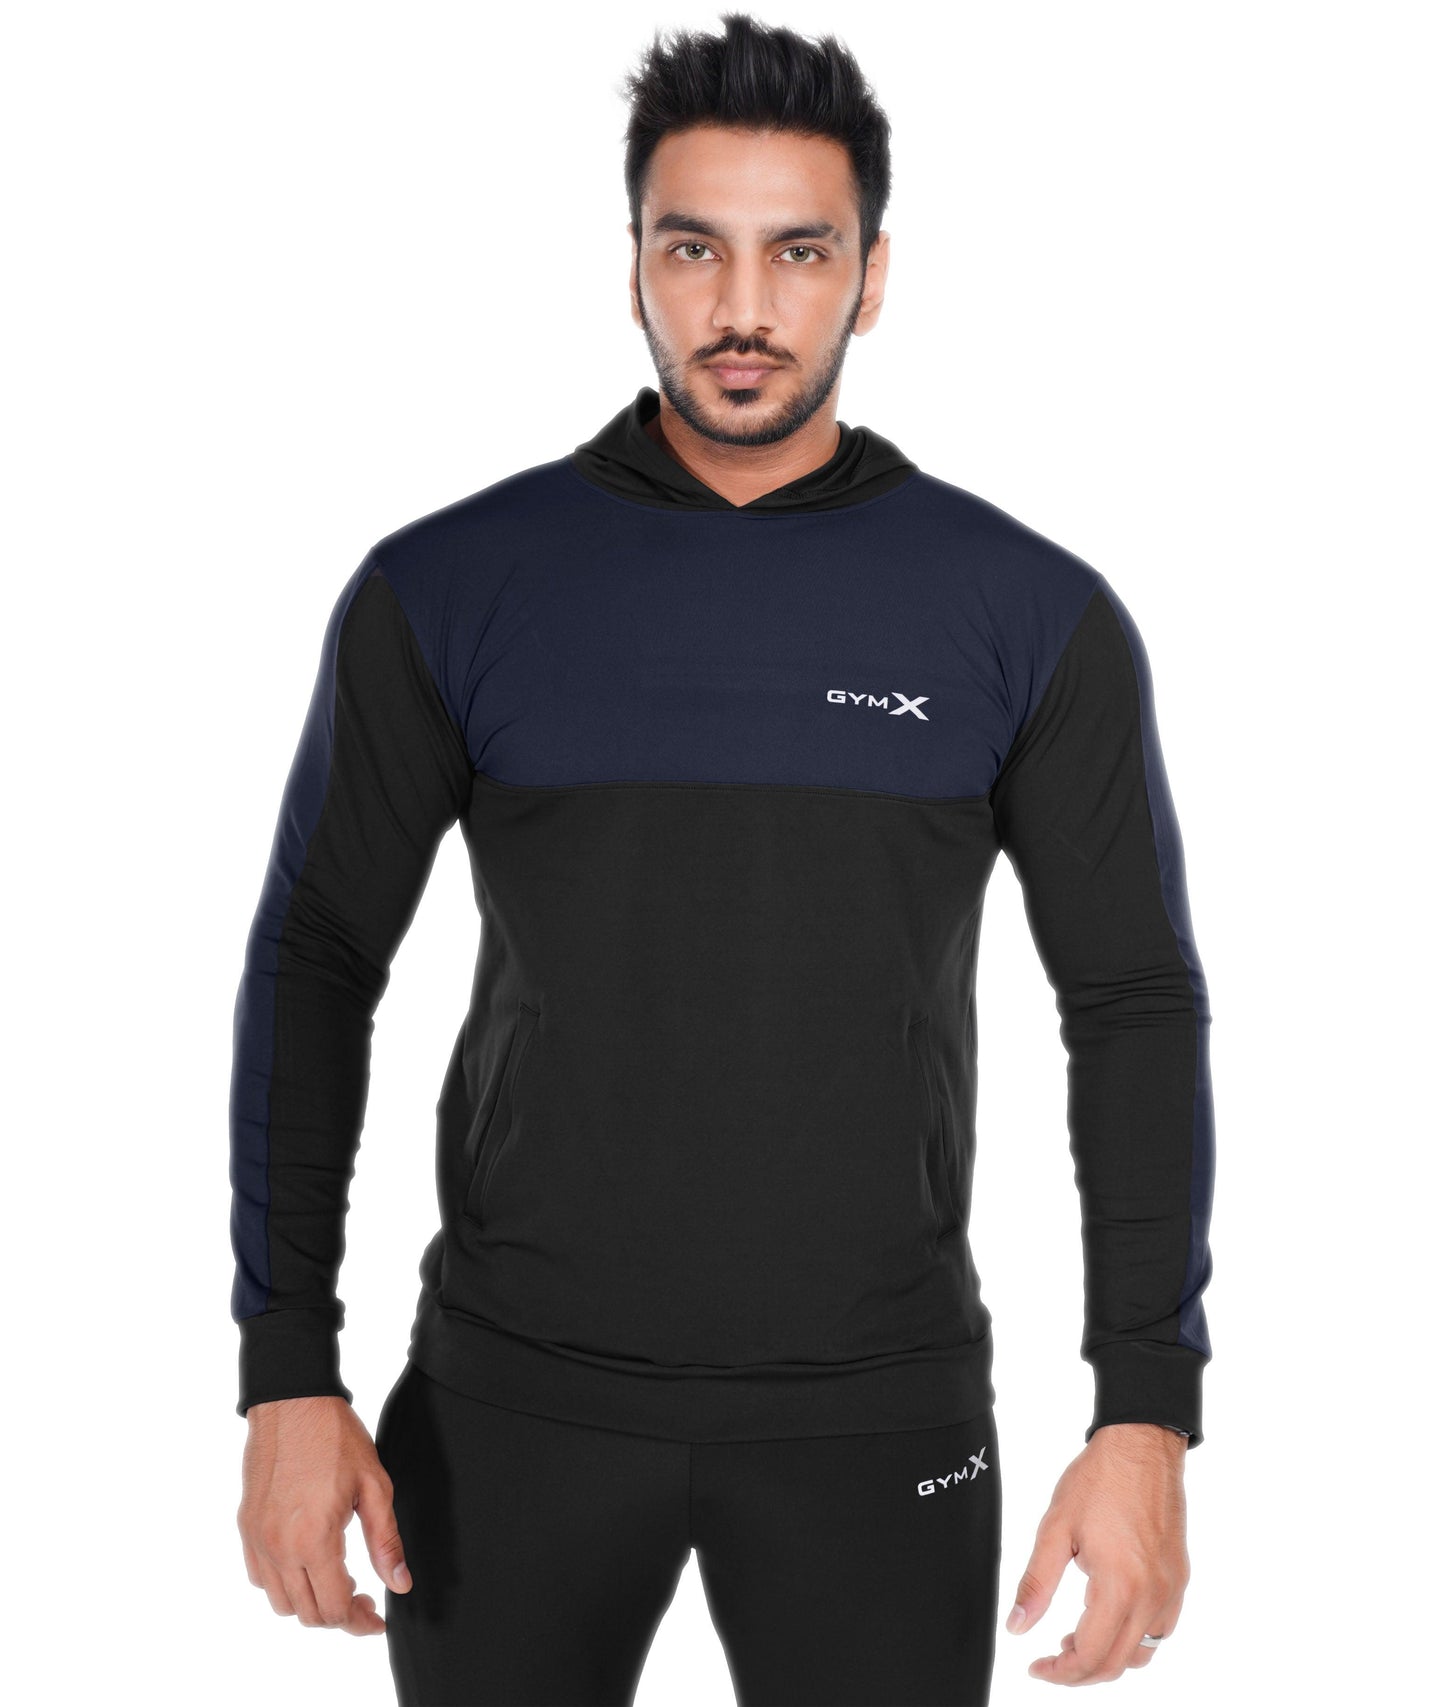 Dual Edition GymX Pullover: Navy Blue- SALE